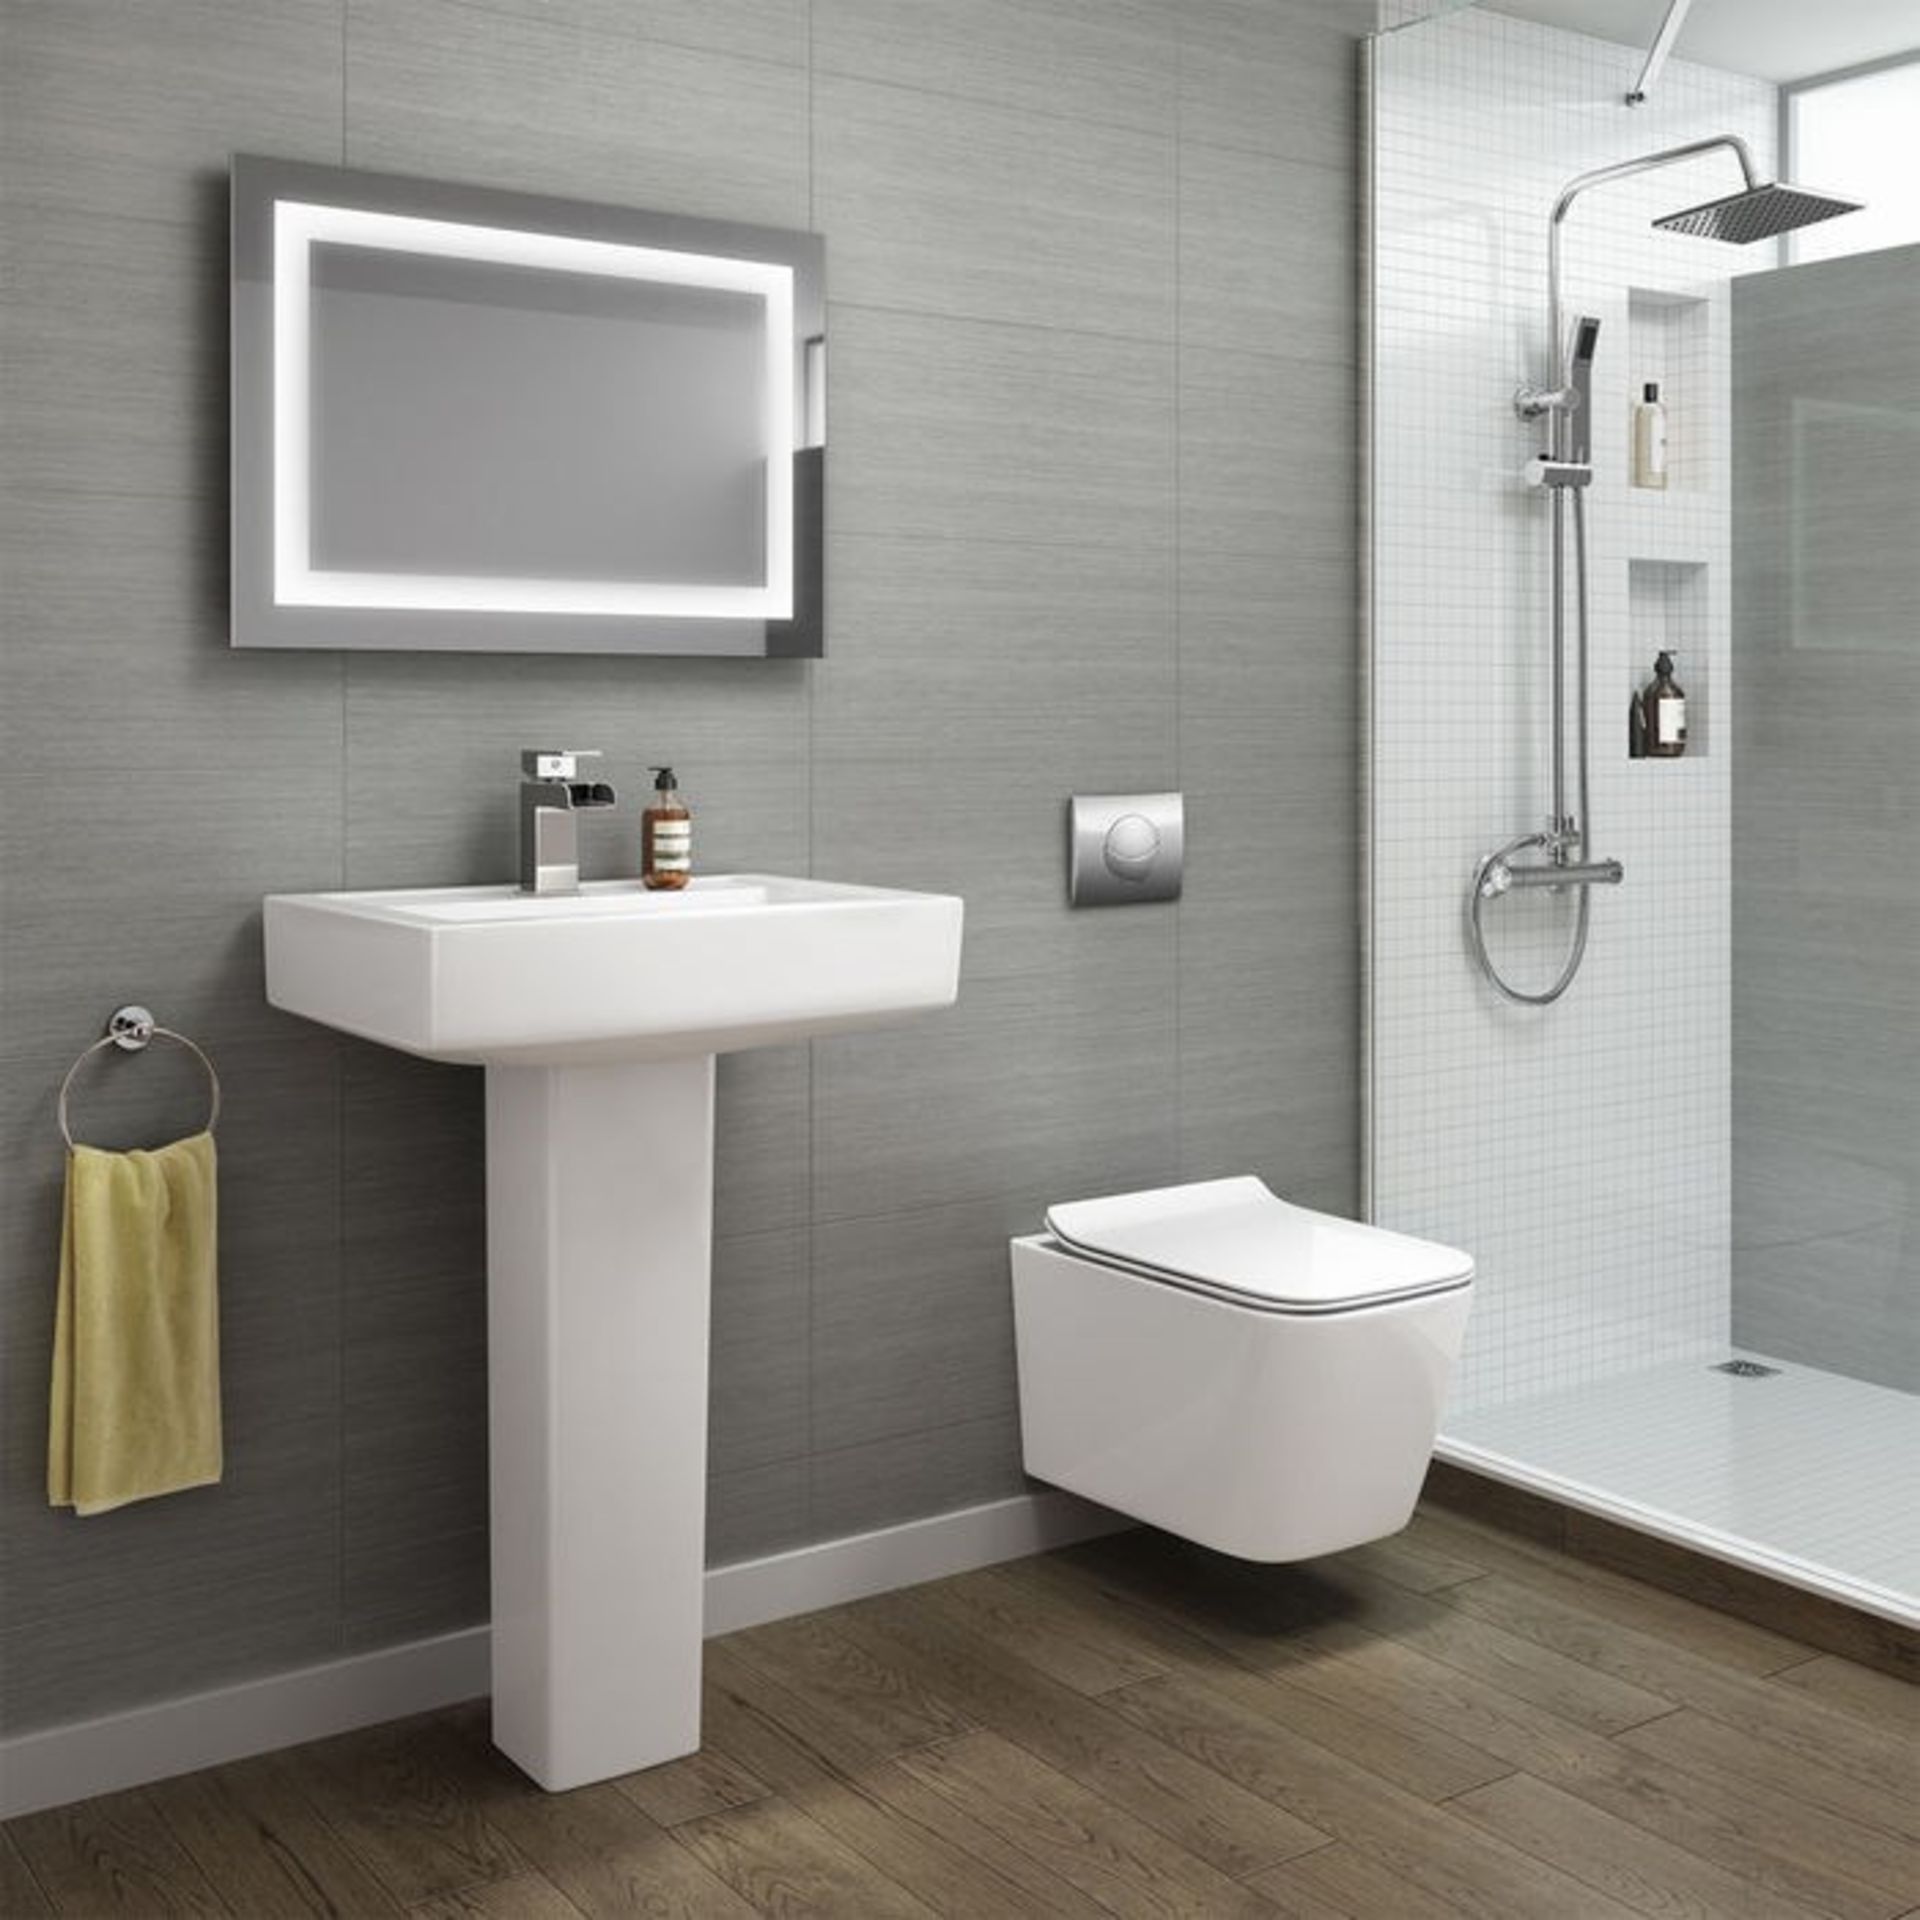 Florence Wall Hung Toilet inc Luxury Soft Close Seat Made from White Vitreous China Anti-scratc... - Image 2 of 3